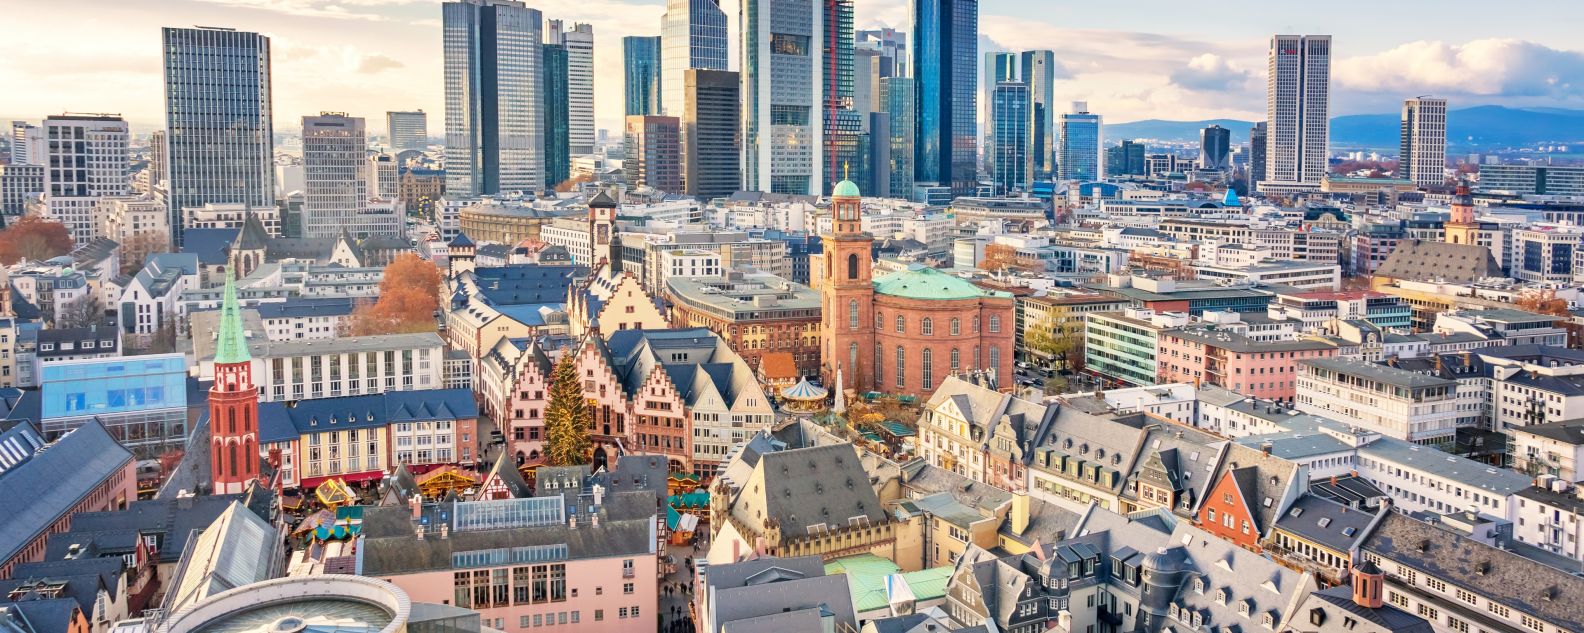 Skyline of downtown Frankfurt am Main Germany with the old town in the foreground on a sunny day